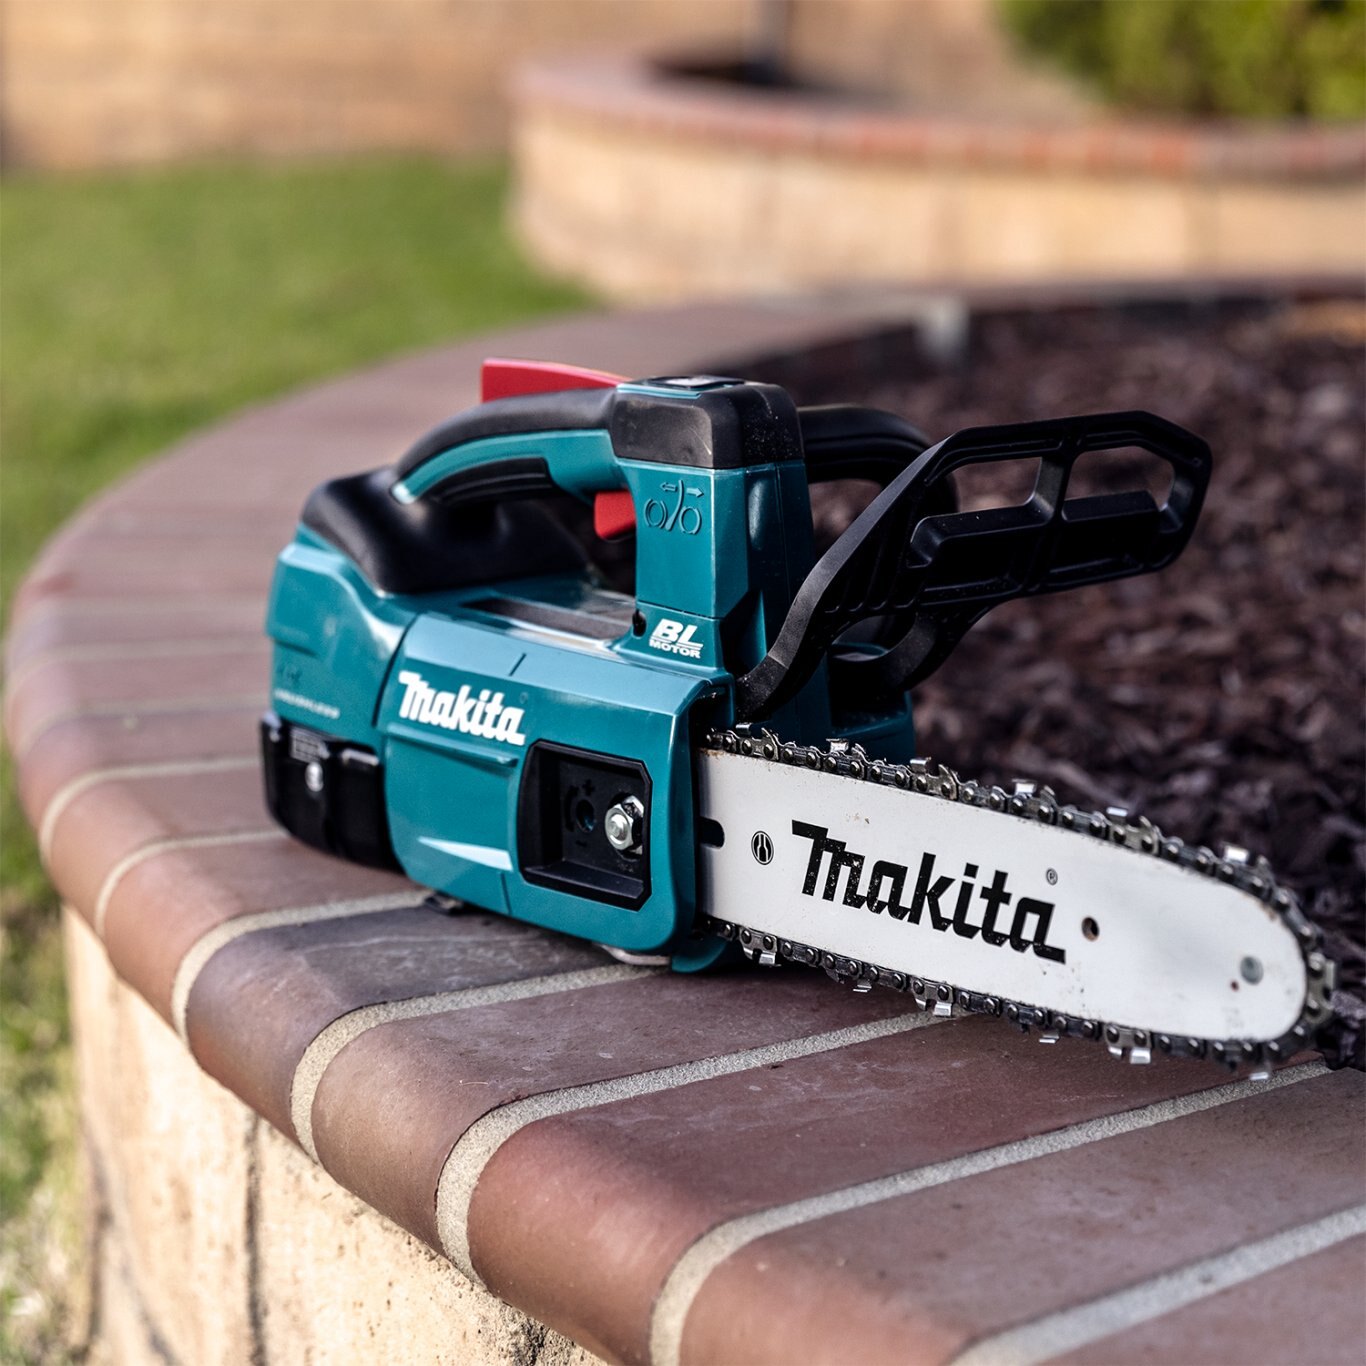 Makita 18V LXT® Lithium?Ion Brushless Cordless 10 Top Handle Chain Saw Kit (4.0Ah)